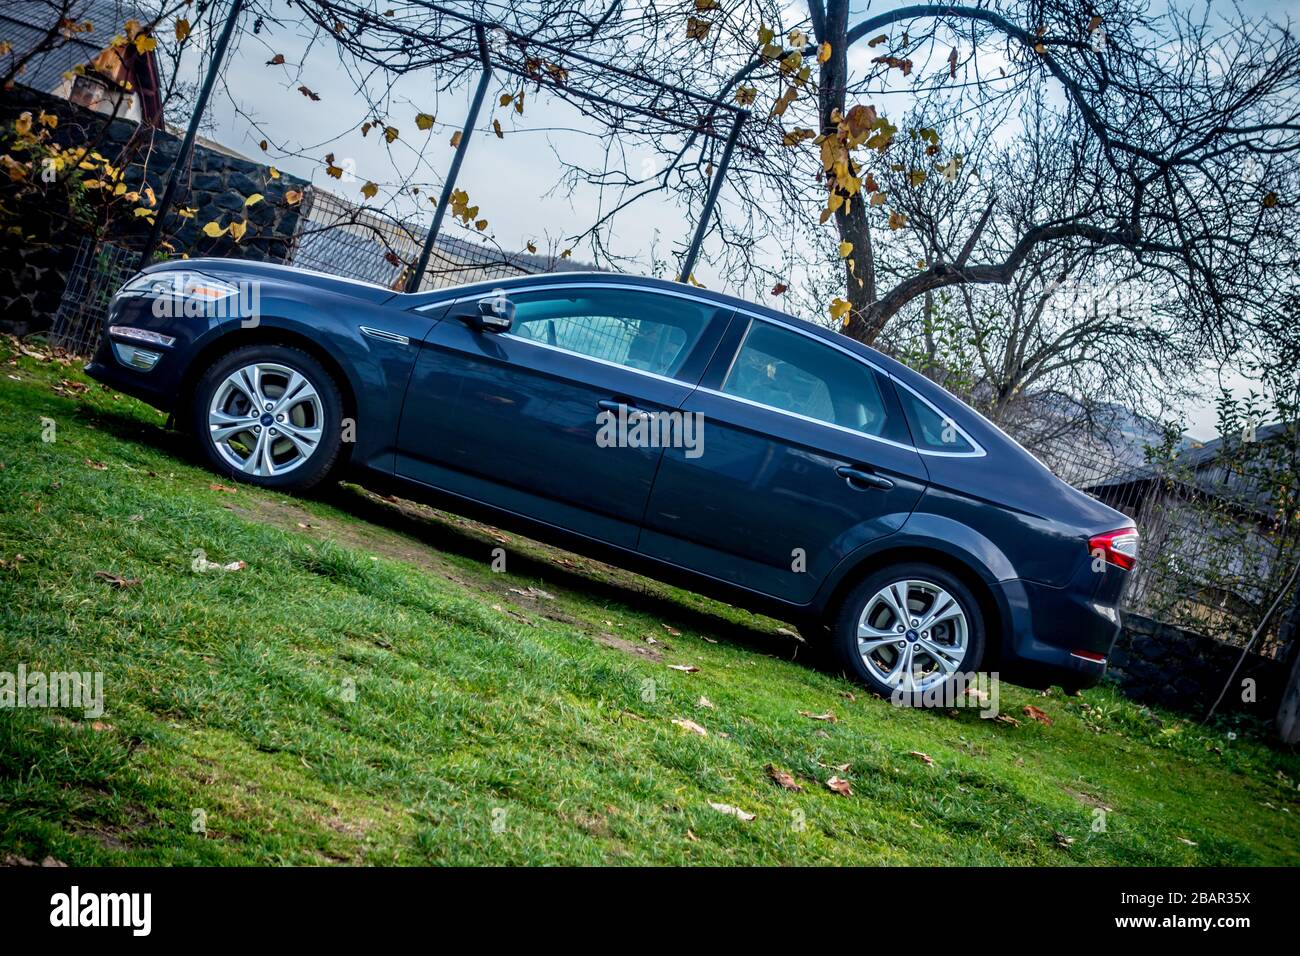 https://c8.alamy.com/comp/2BAR35X/beautiful-sedan-ford-mondeo-mk-4-with-lots-of-extra-equipment-photo-session-in-a-parking-lot-near-a-brown-autumn-forest-grey-colour-with-chrome-2BAR35X.jpg